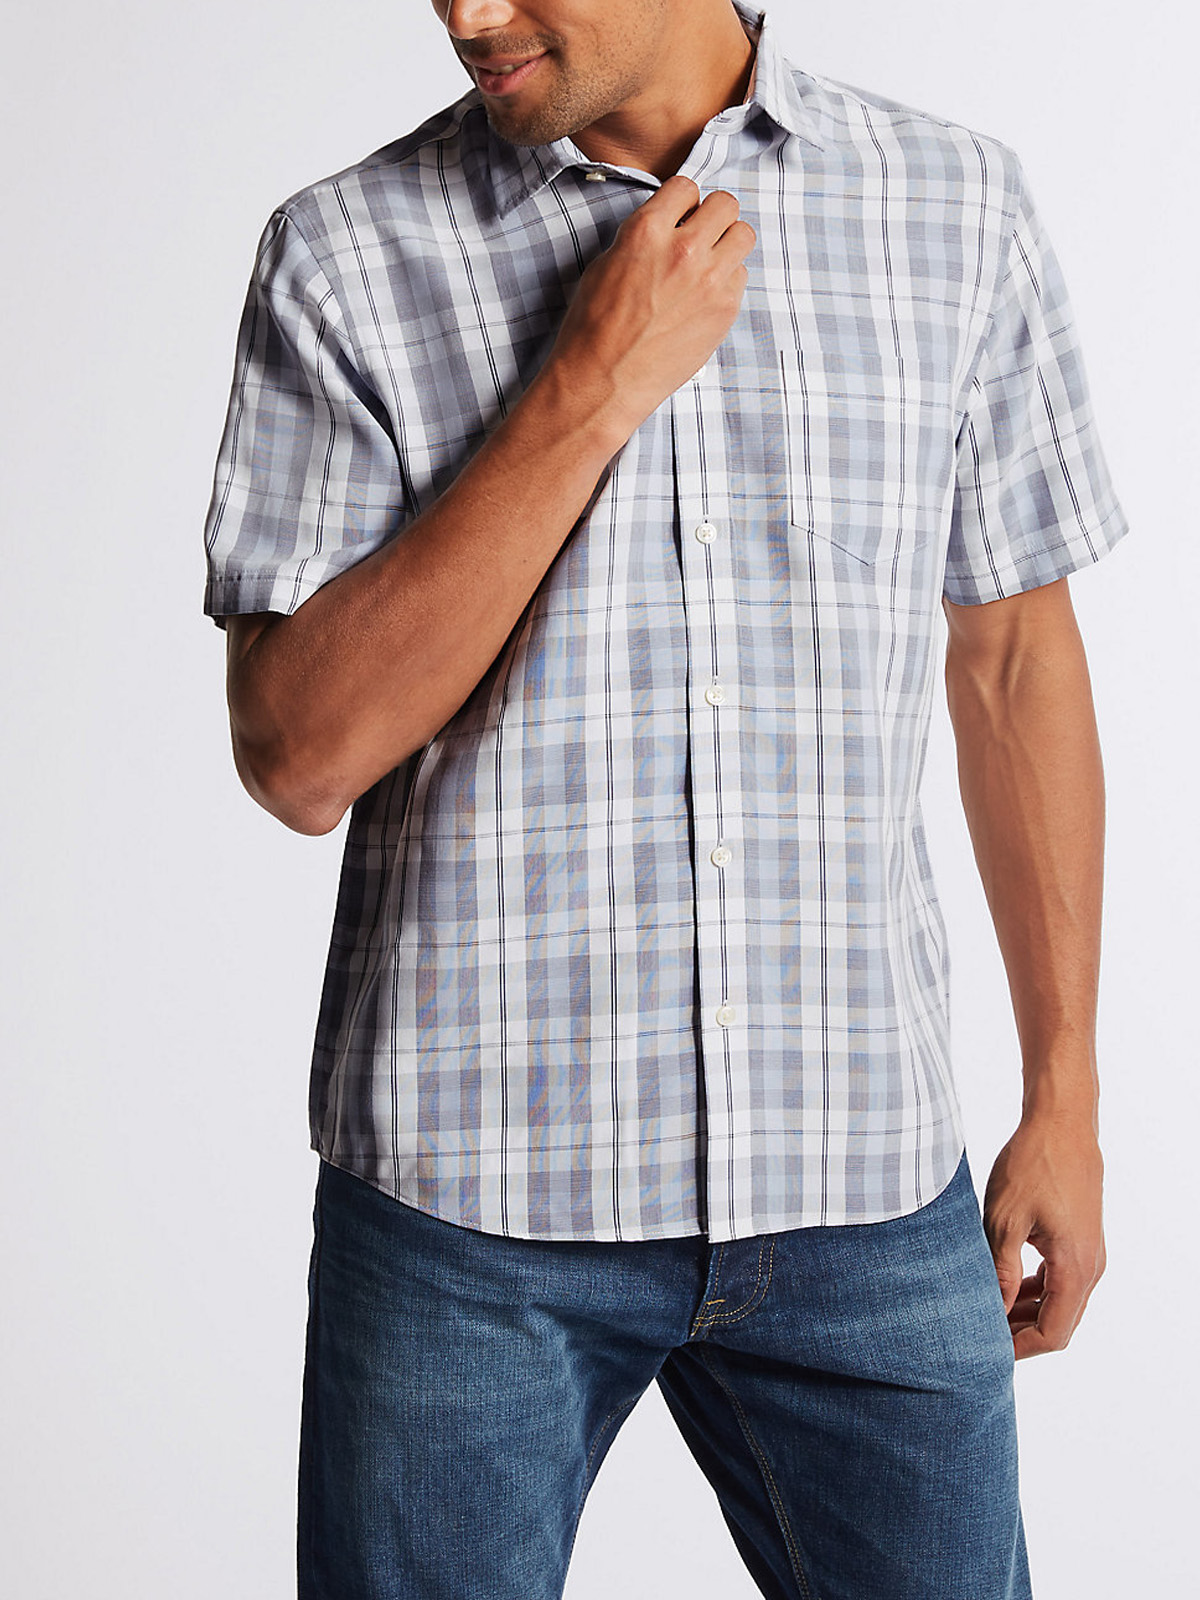 Marks and Spencer - - M&5 WHITE Mens Pure Cotton Checked Short Sleeve ...